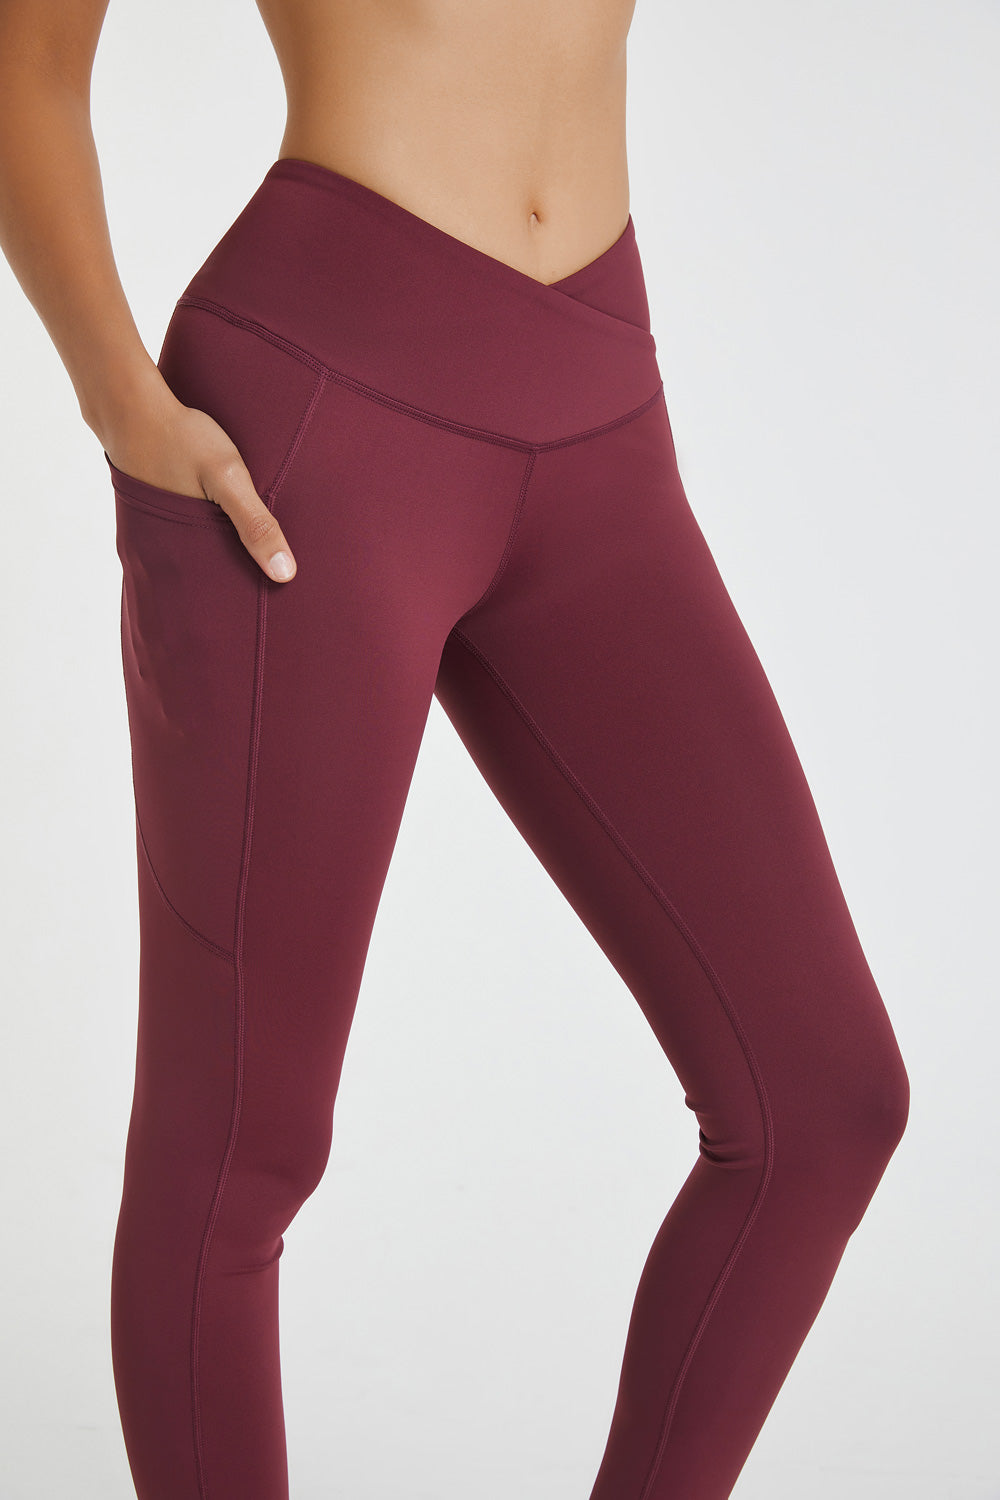 Burgundy Crossover Legging With Pockets, 40% OFF